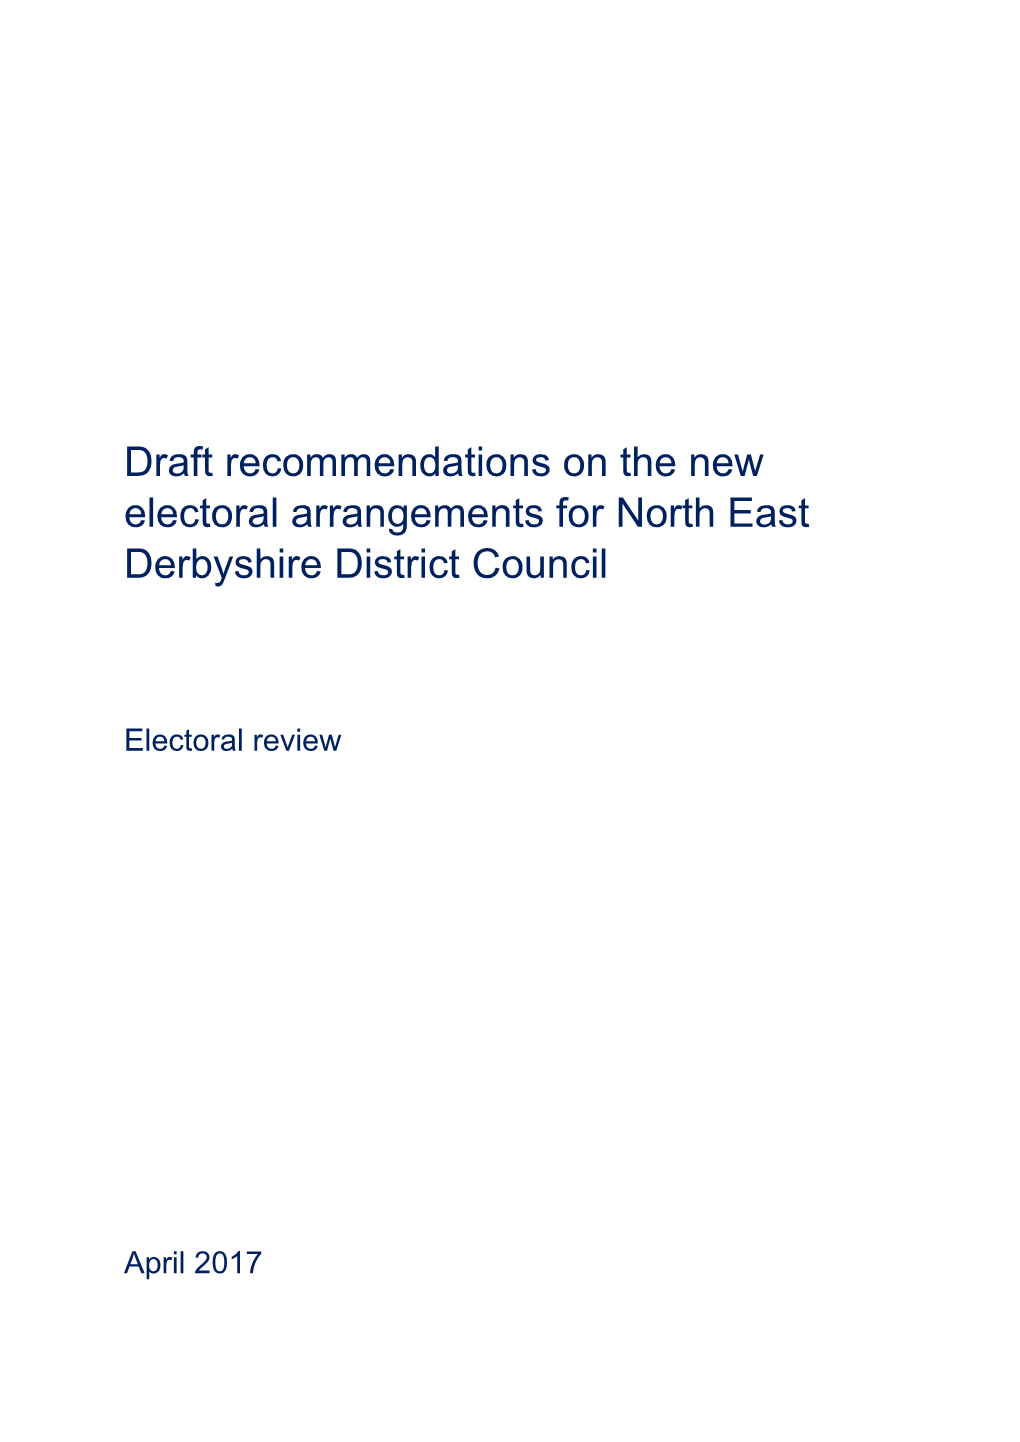 Draft Recommendations on the New Electoral Arrangements for North East Derbyshire District Council